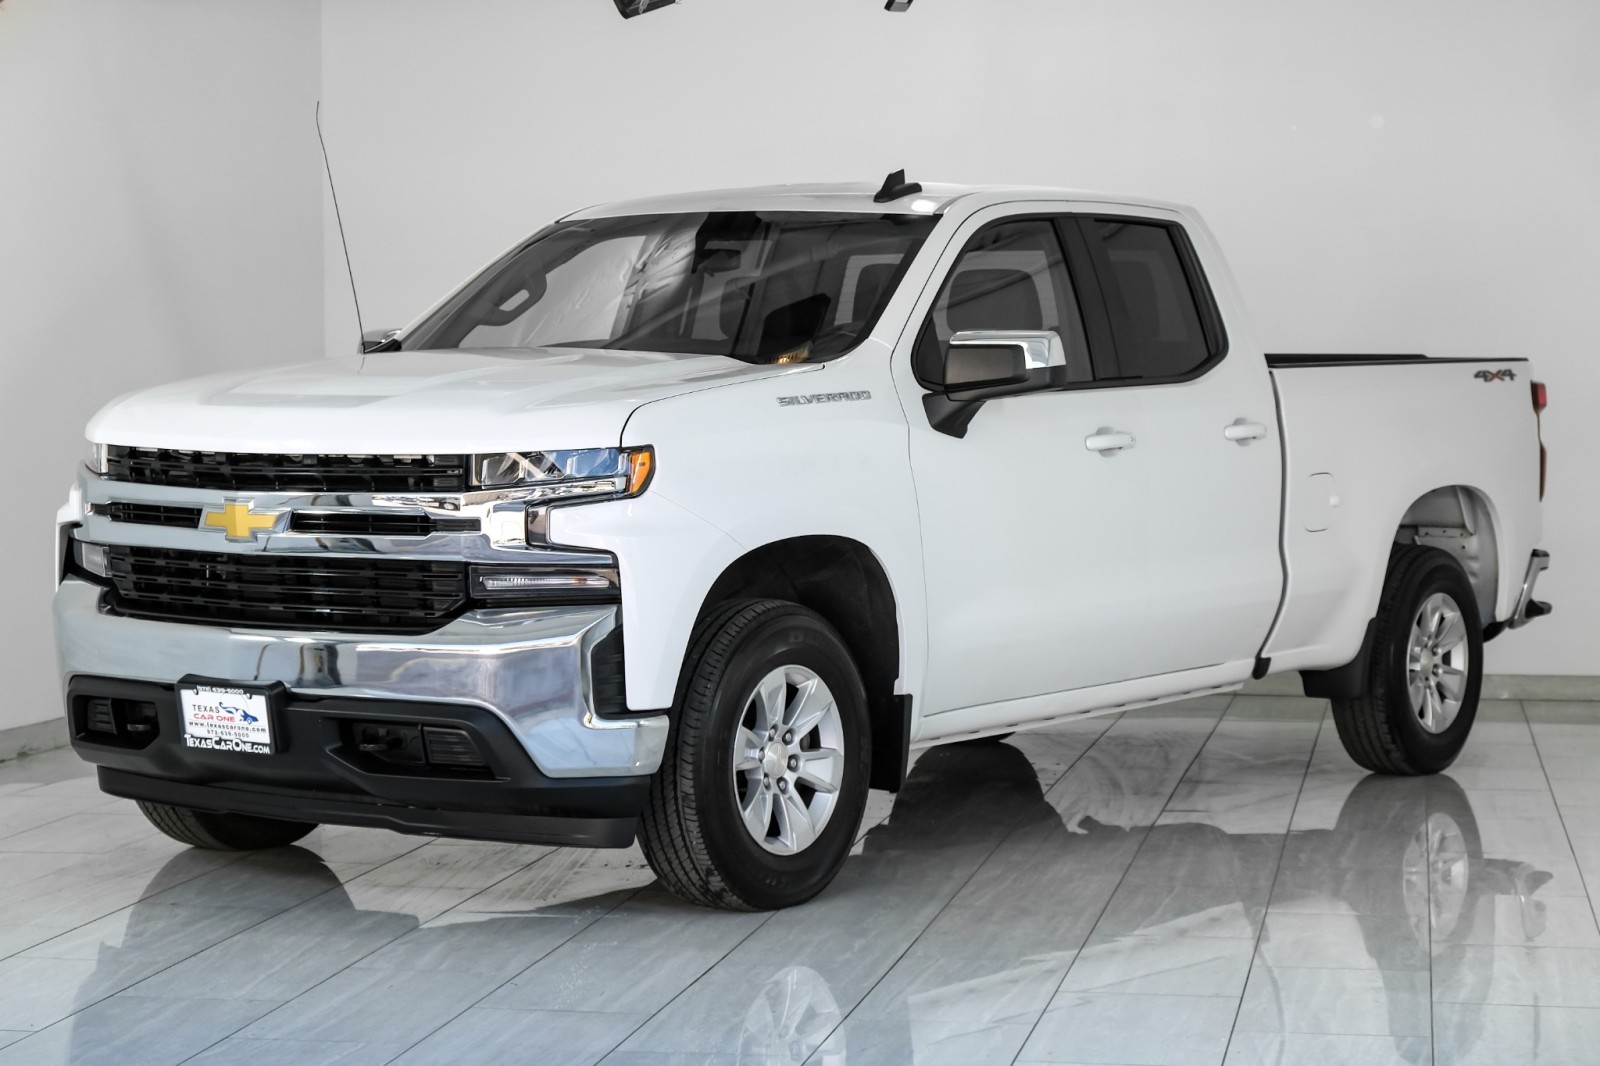 2019 Chevrolet Silverado 1500 LT DOUBLE CAB 4WD AUTOMATIC HEATED SEATS REAR CAME 6